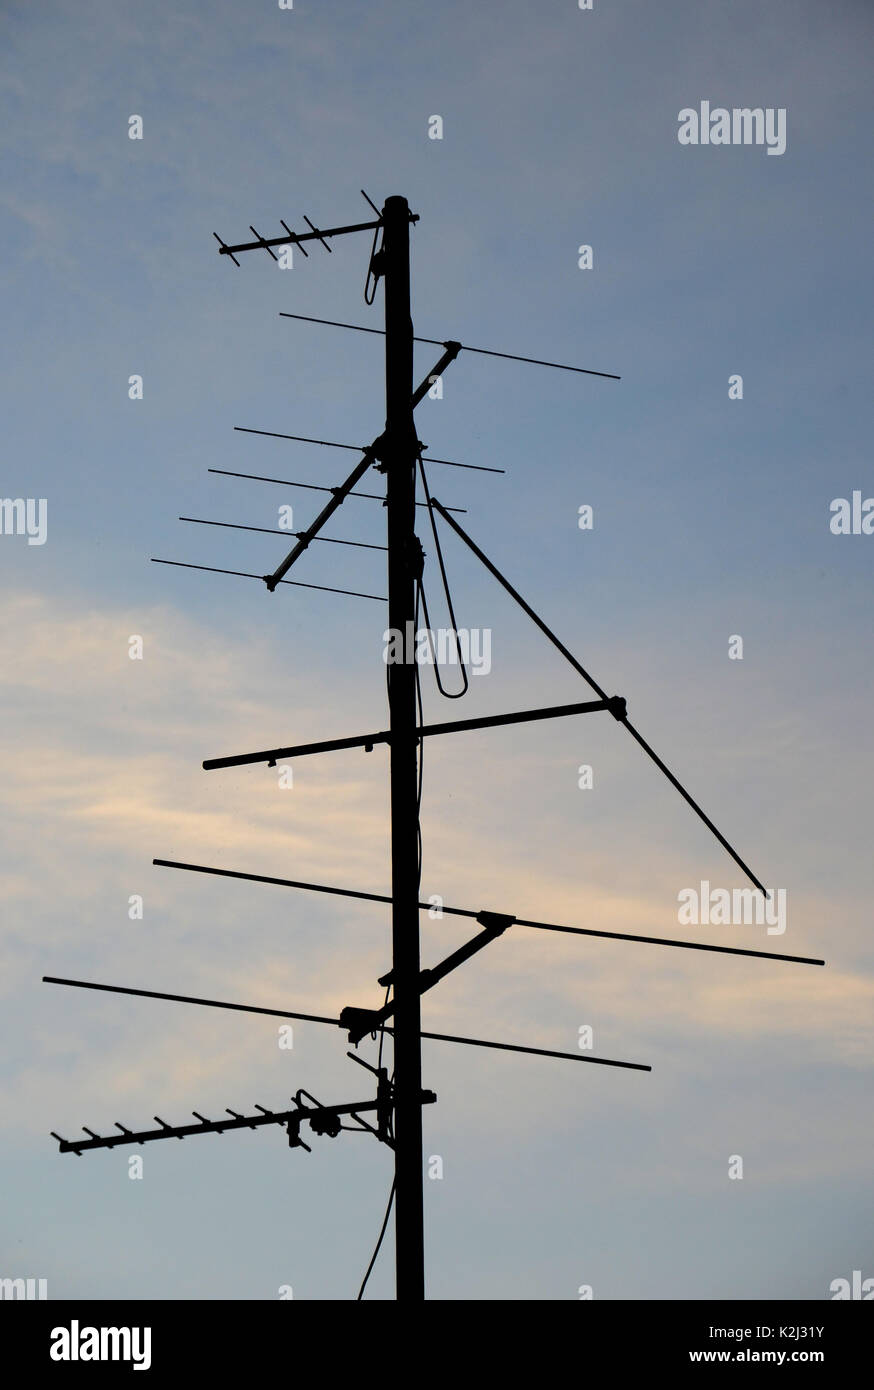 Aerial antenna for analog TV signal reception seen as silhouette against a blue eveing sky with light cirrus clouds. . Stock Photo